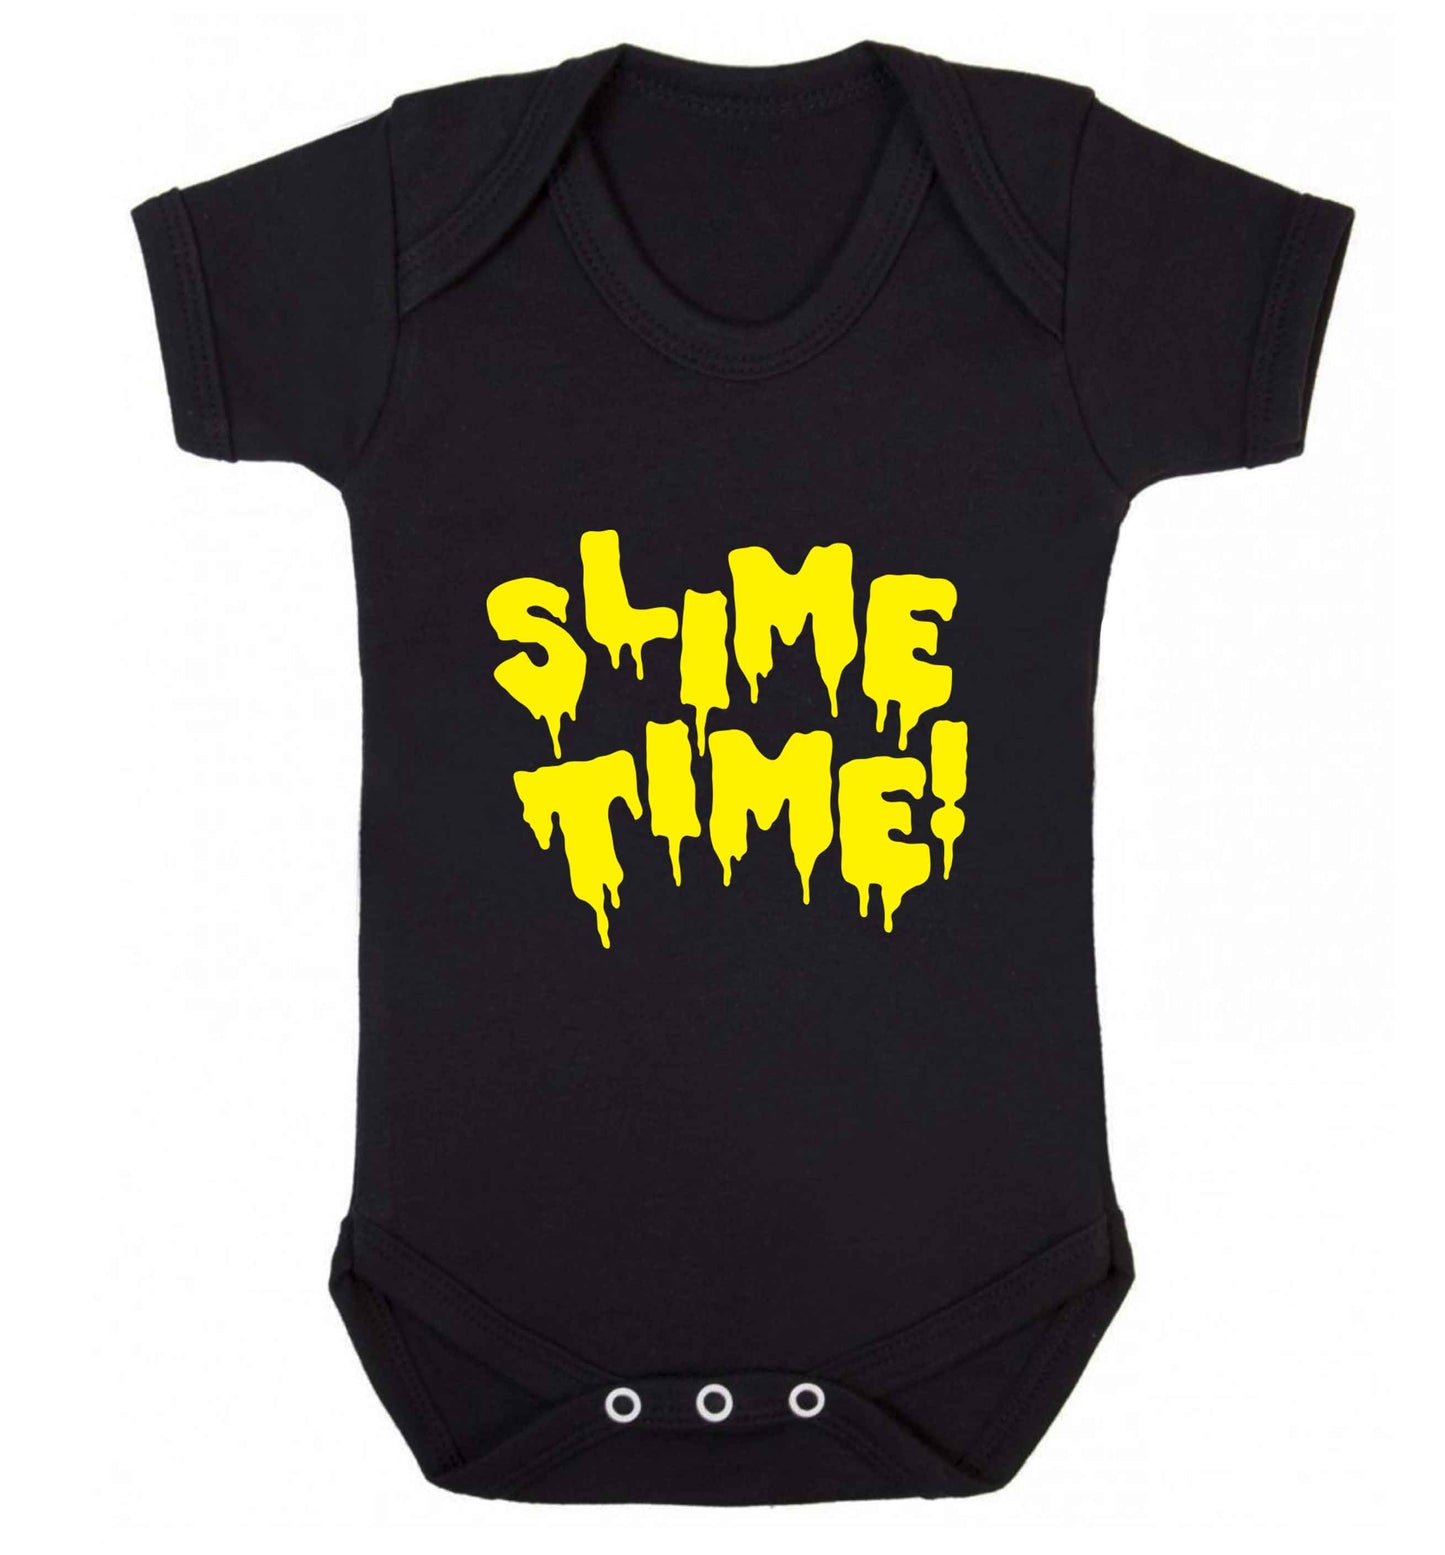 Neon yellow slime time baby vest black 18-24 months